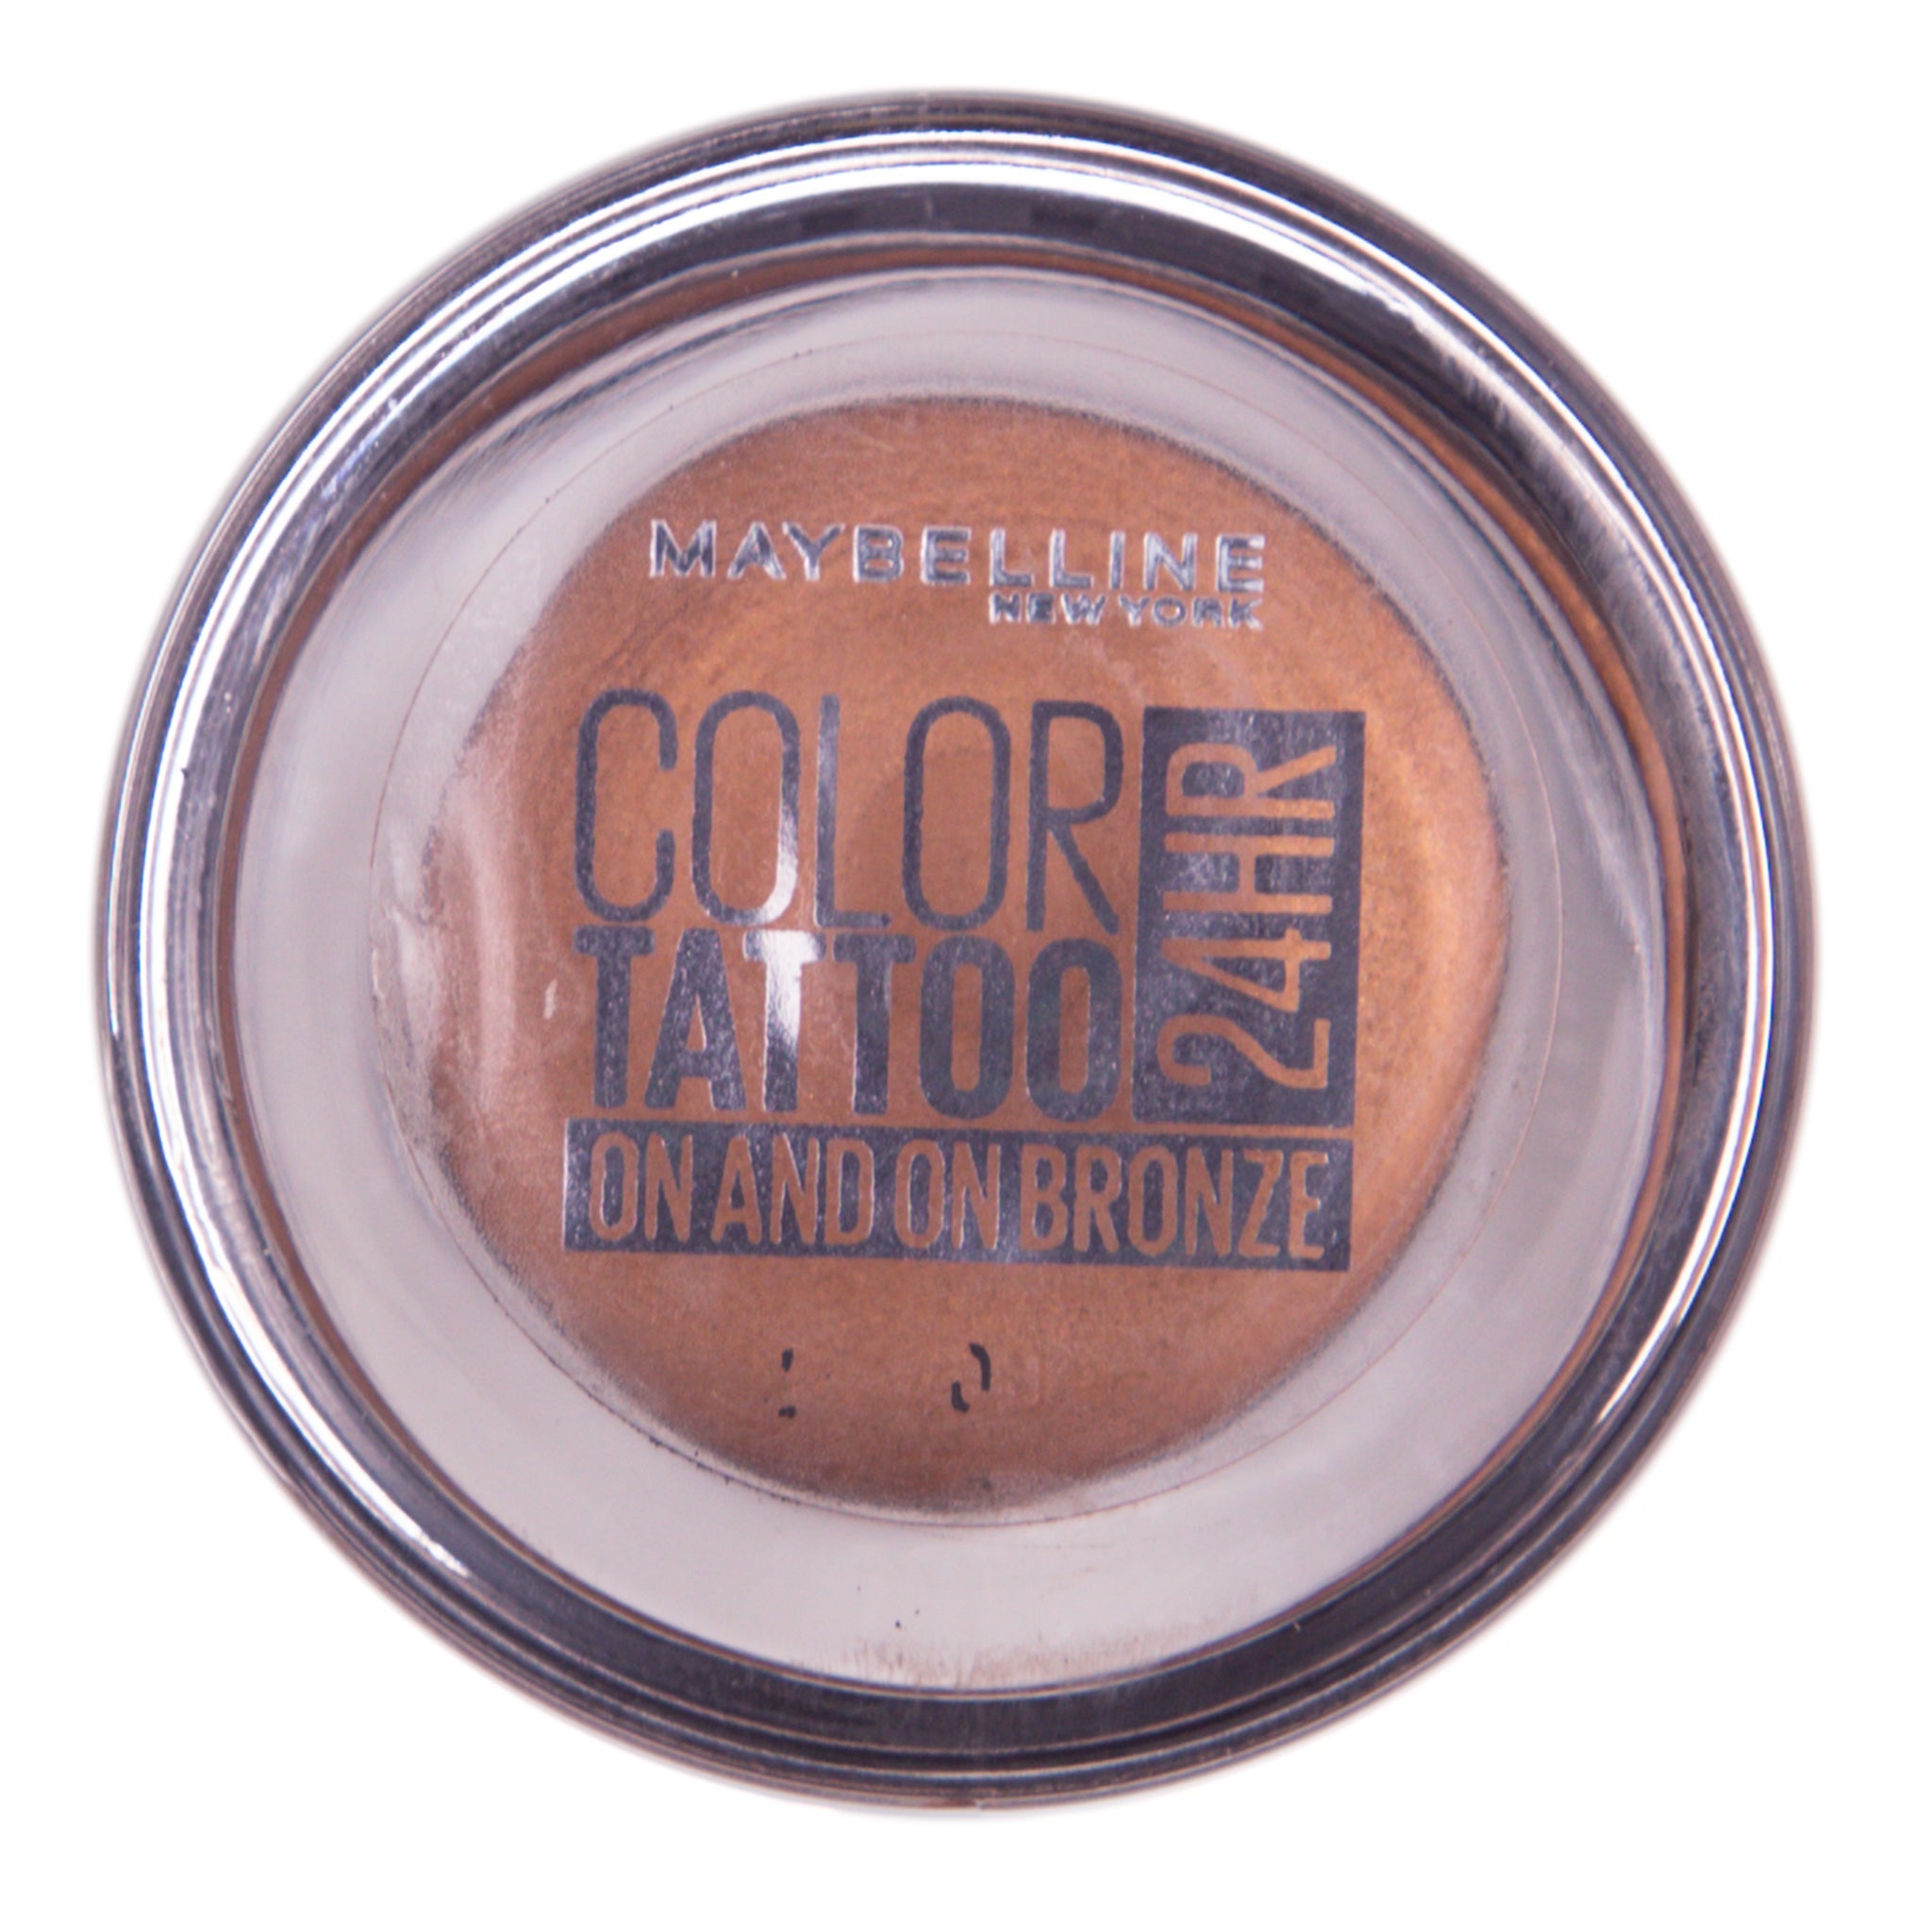 Maybelline Colour Tattoo 24 Hour Eye Shadow - 35 On And On Bronze